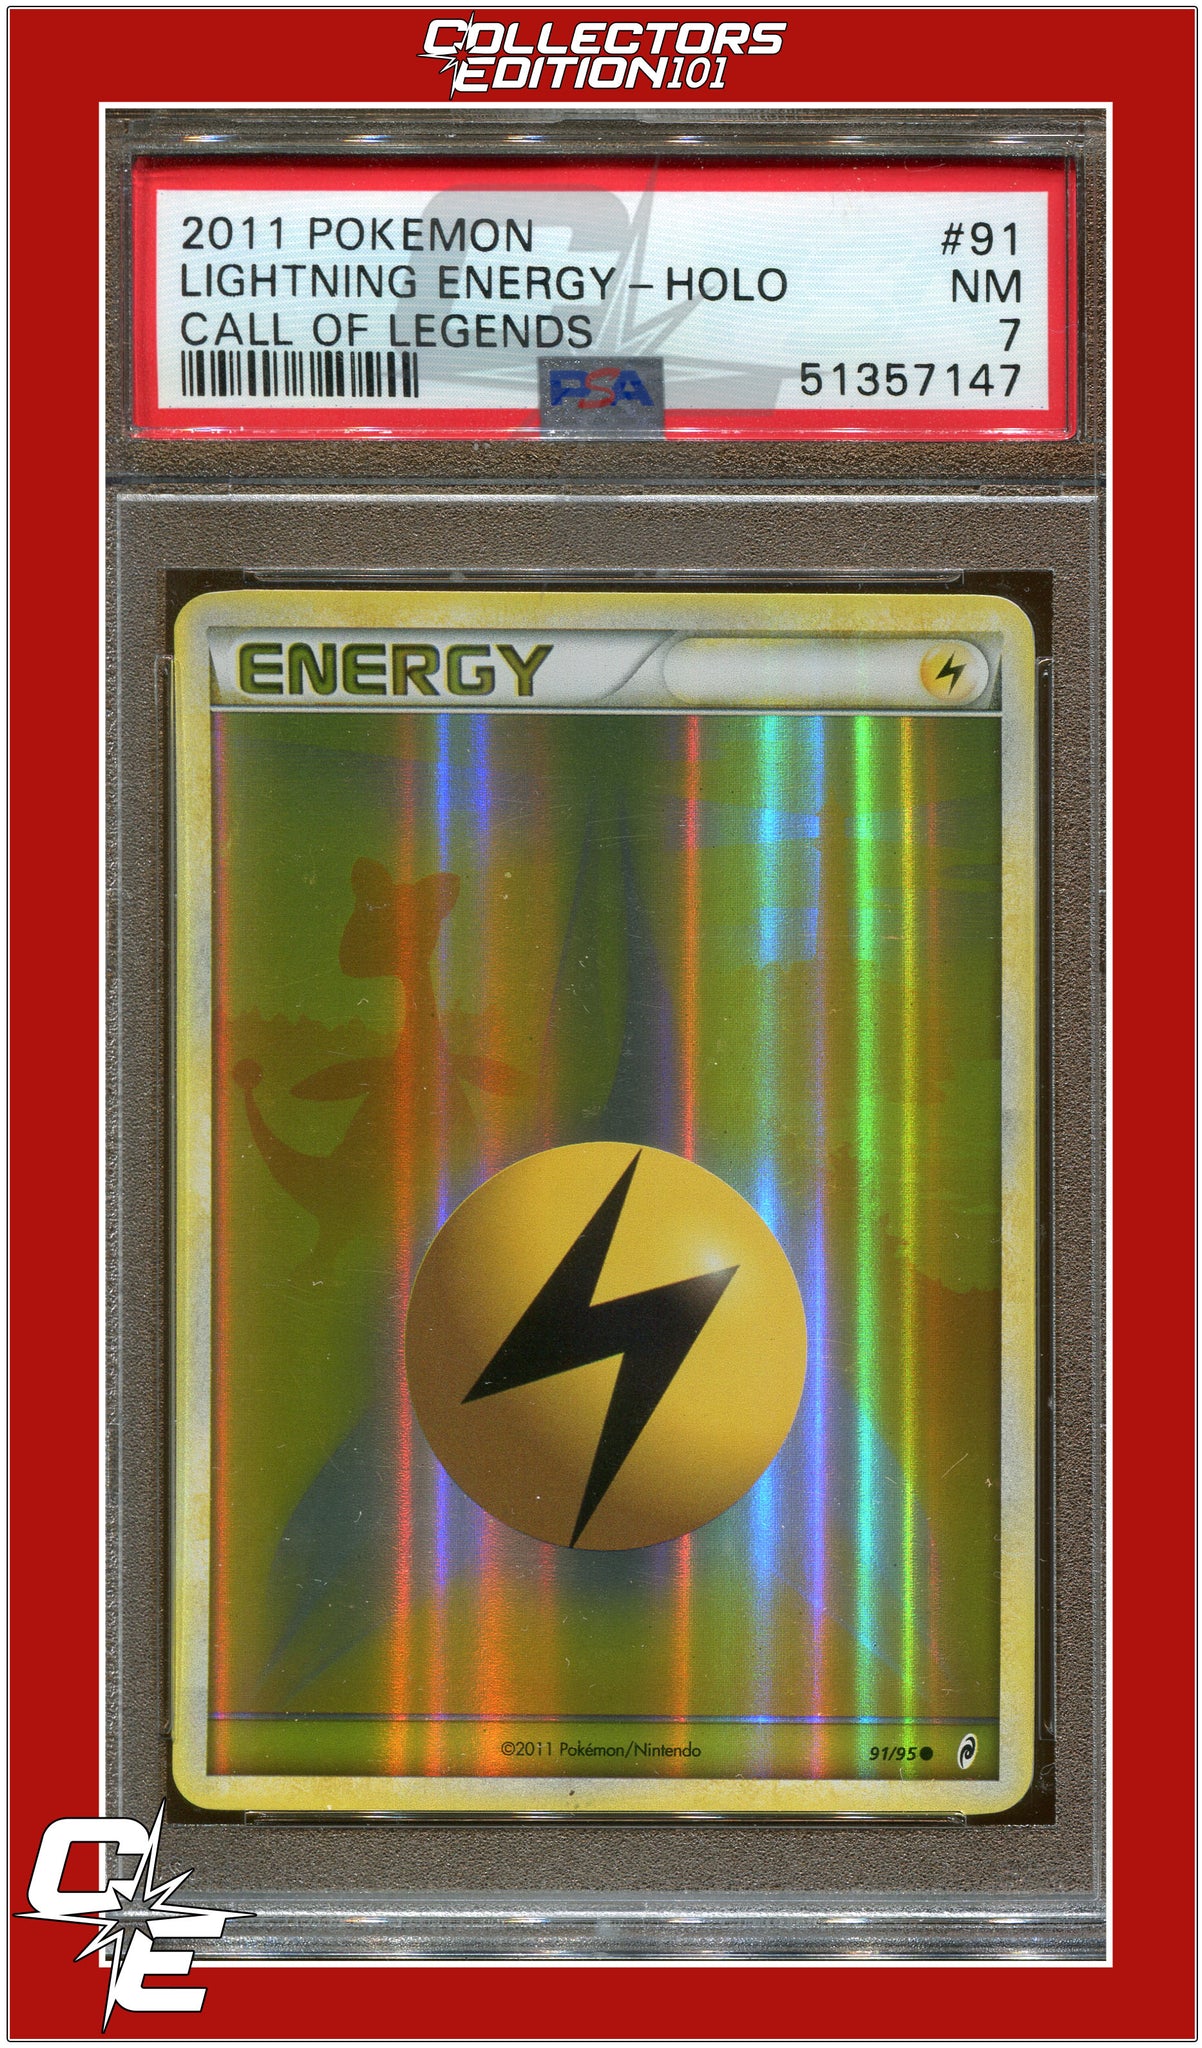 Call of Legends 91 Lightning Energy Holo PSA 7 | Collectors Edition 101